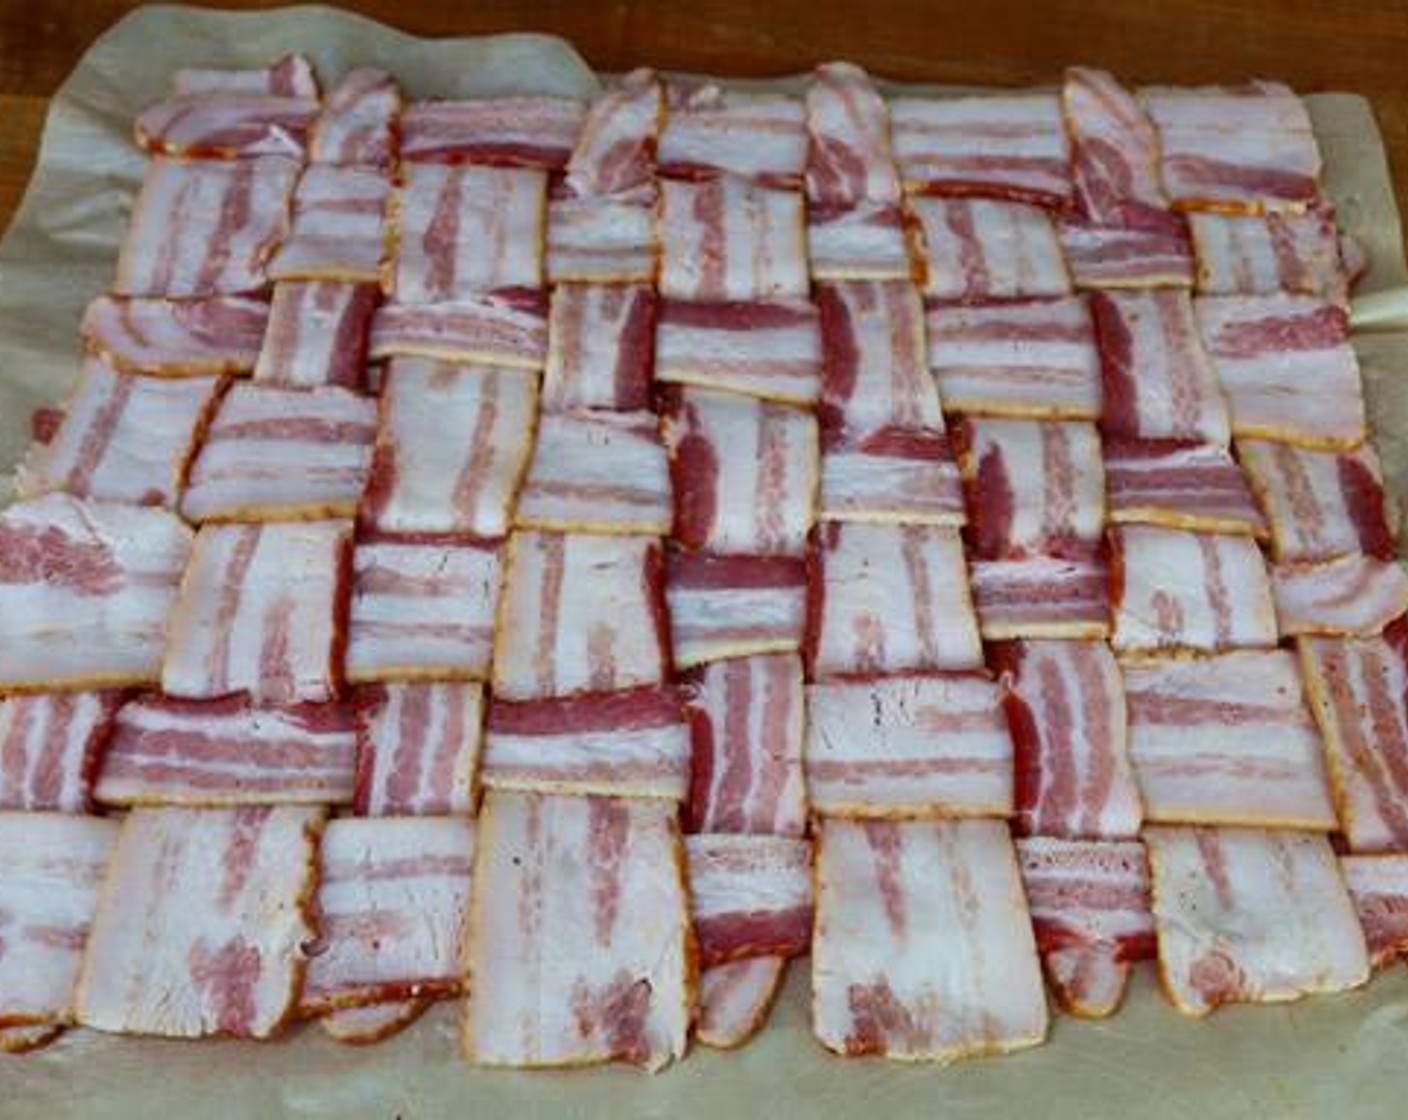 step 5 Lay out the Thick-Cut Bacon (2 lb) on a sheet of parchment paper and fold every other piece weaving strips across into a “basket weave” pattern.